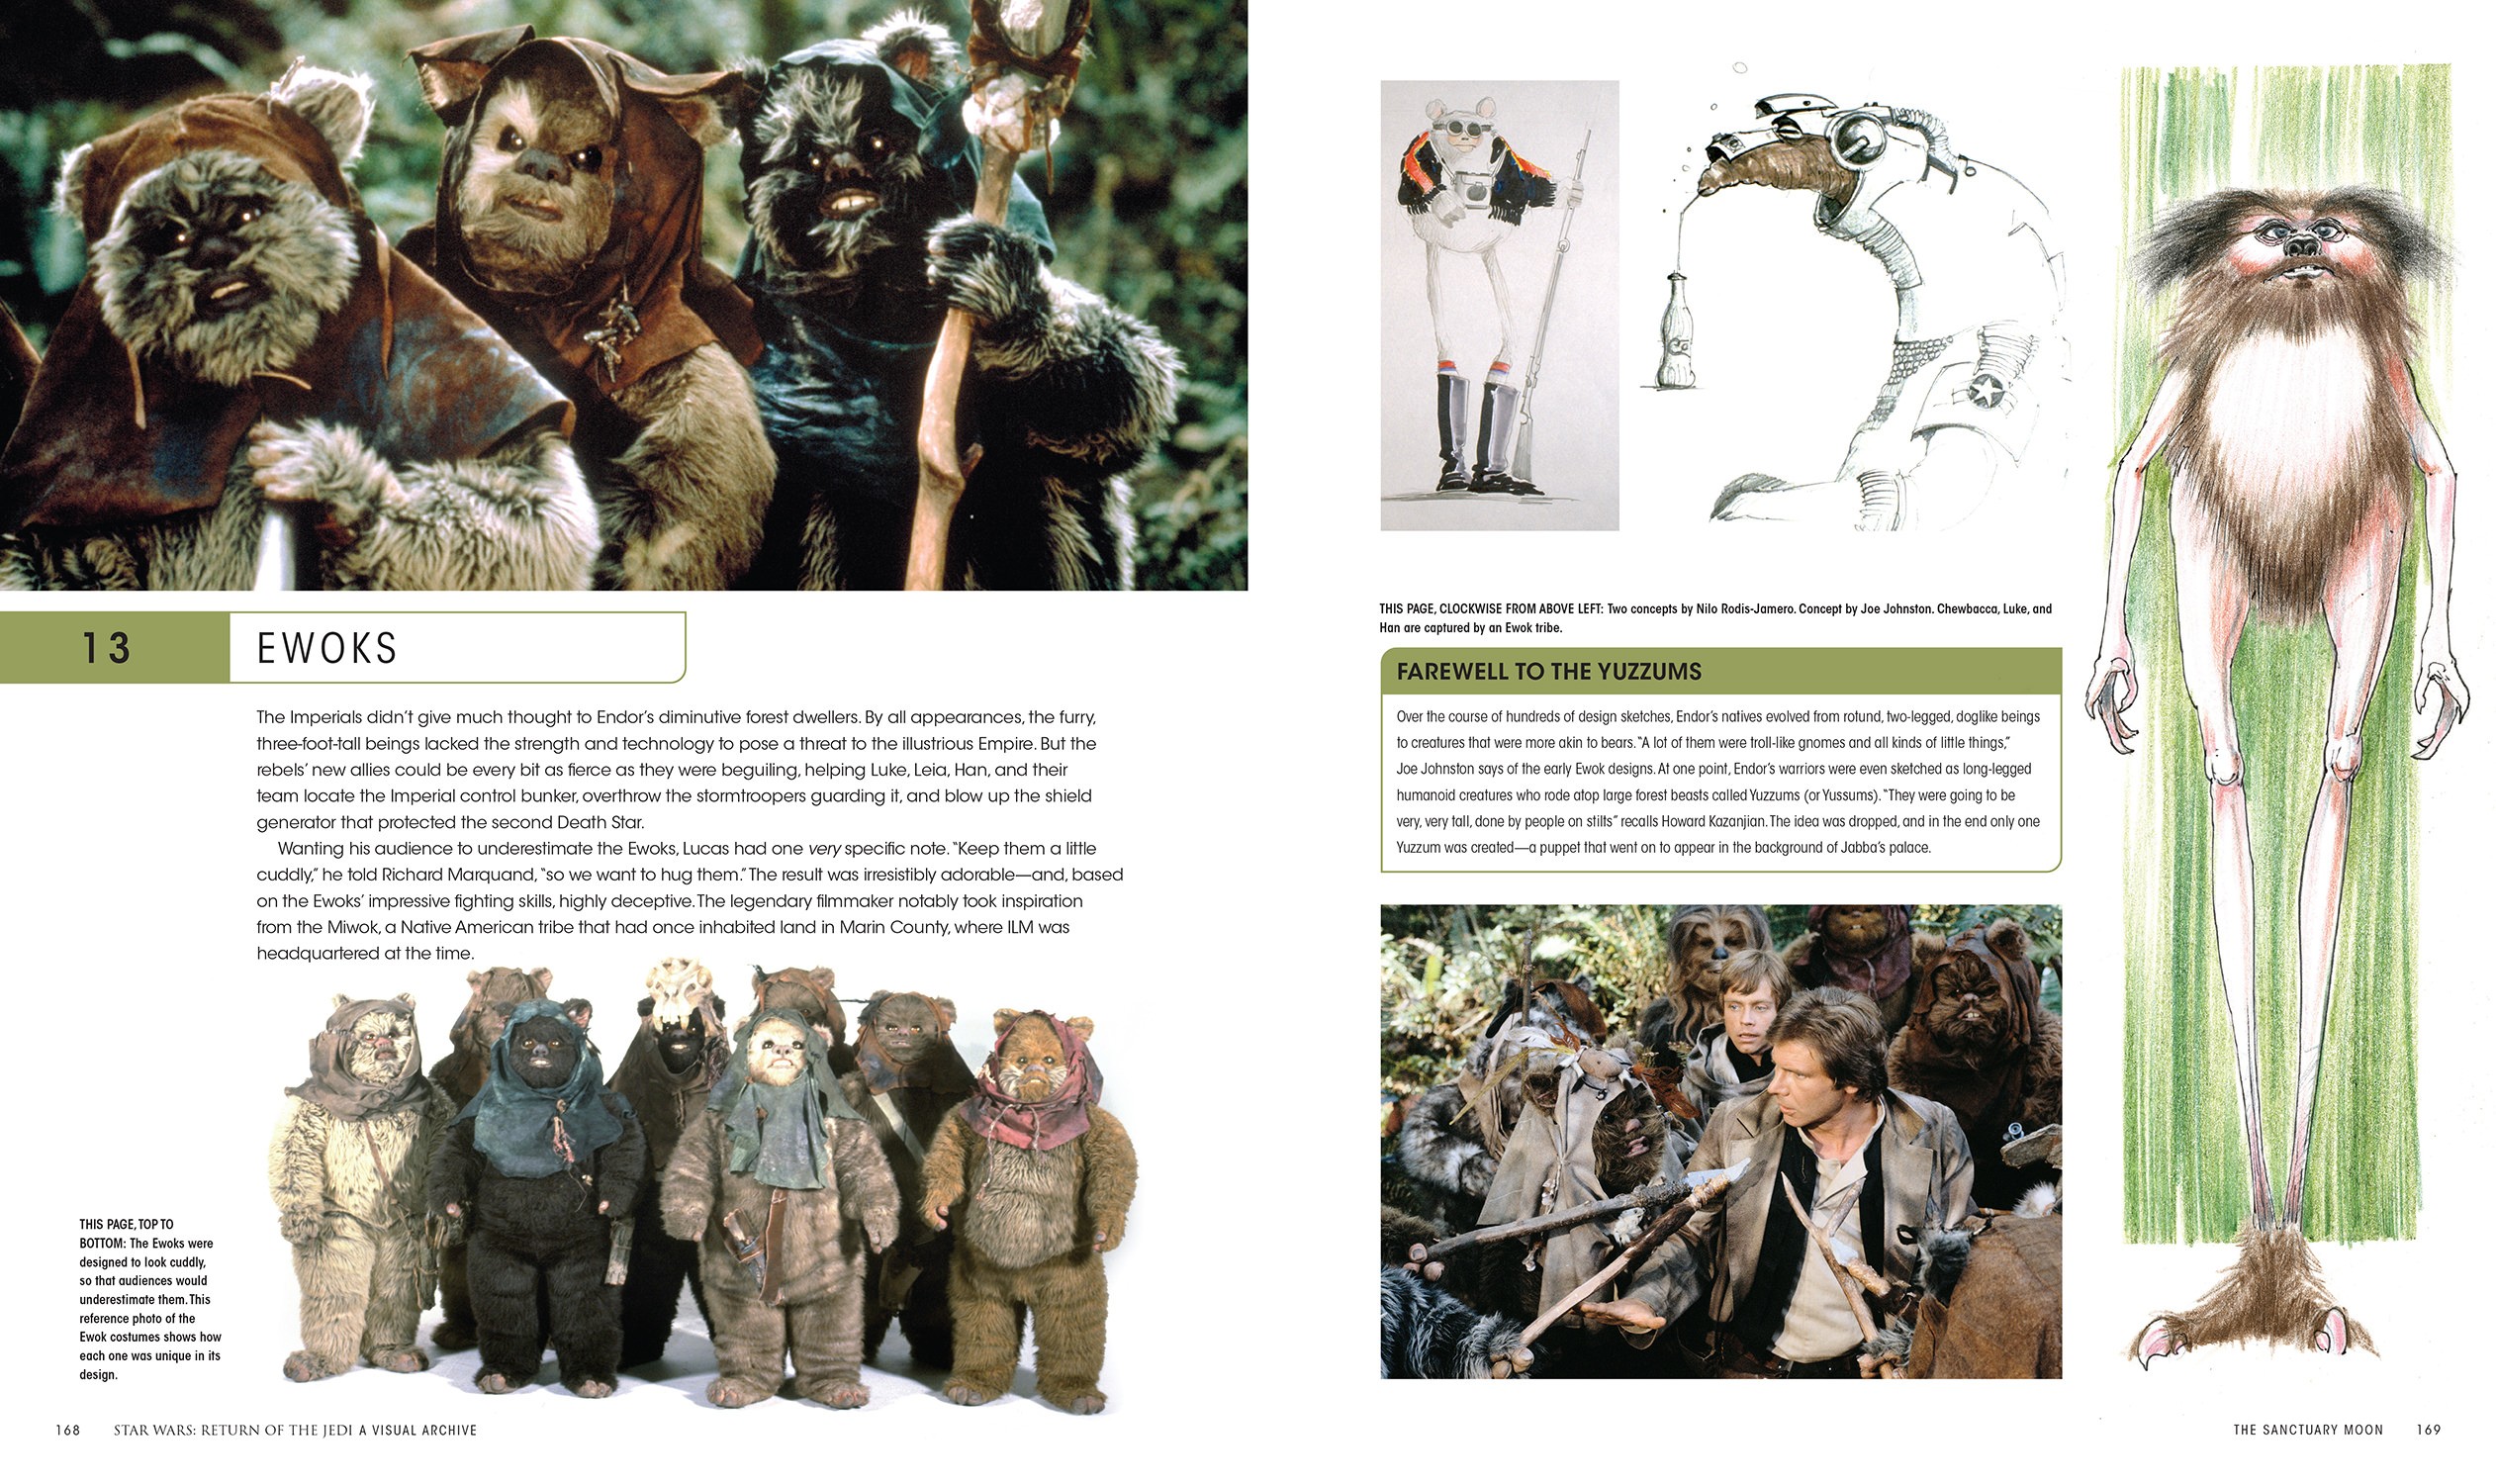 Star Wars: Return of the Jedi: A Visual Archive (Prototype Shown) View 11